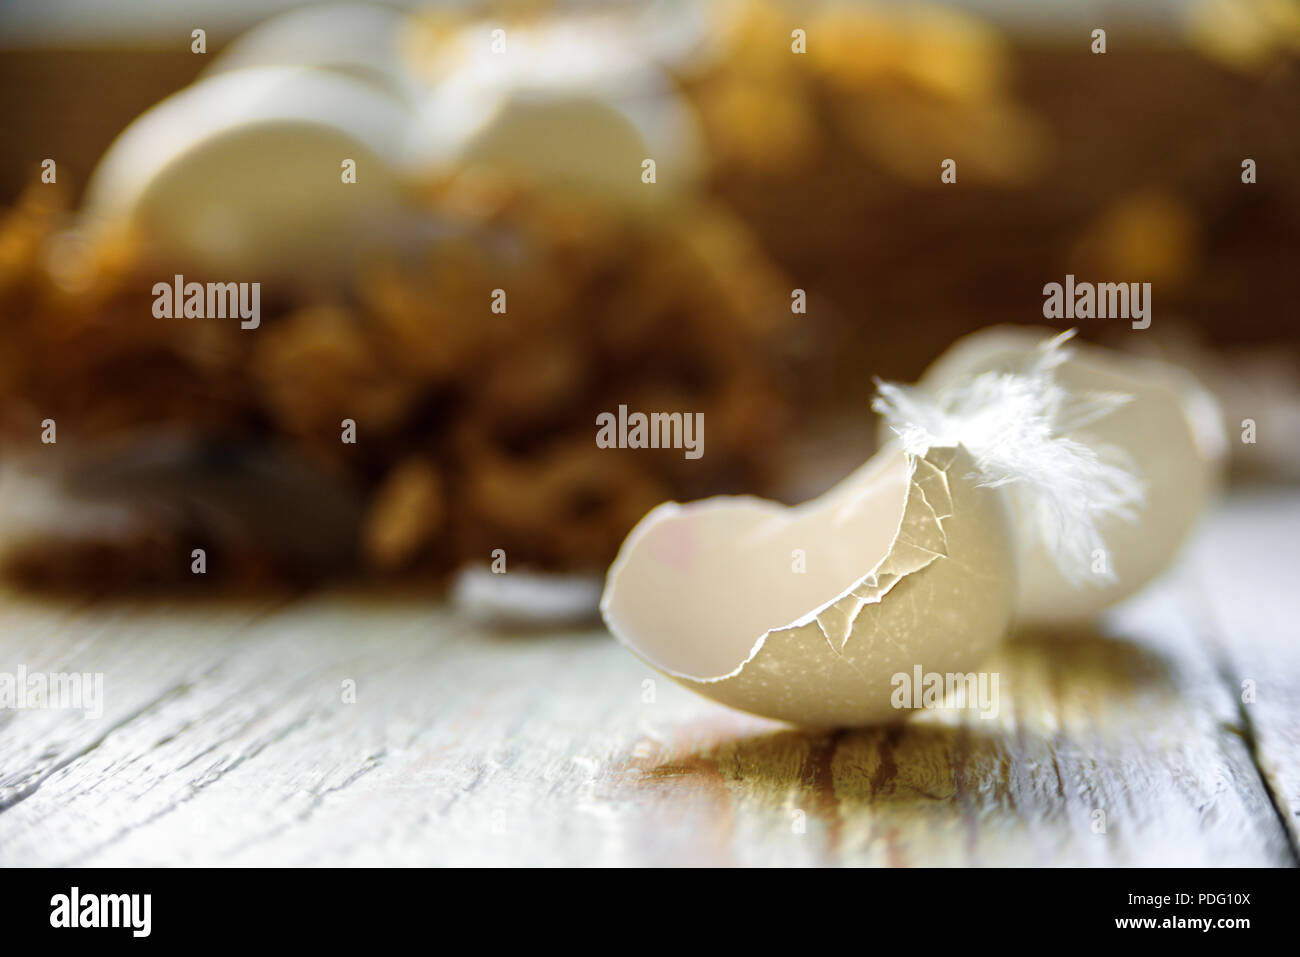 White eggs inthe nest with cracked shell near it. Feather of bird and branches Stock Photo